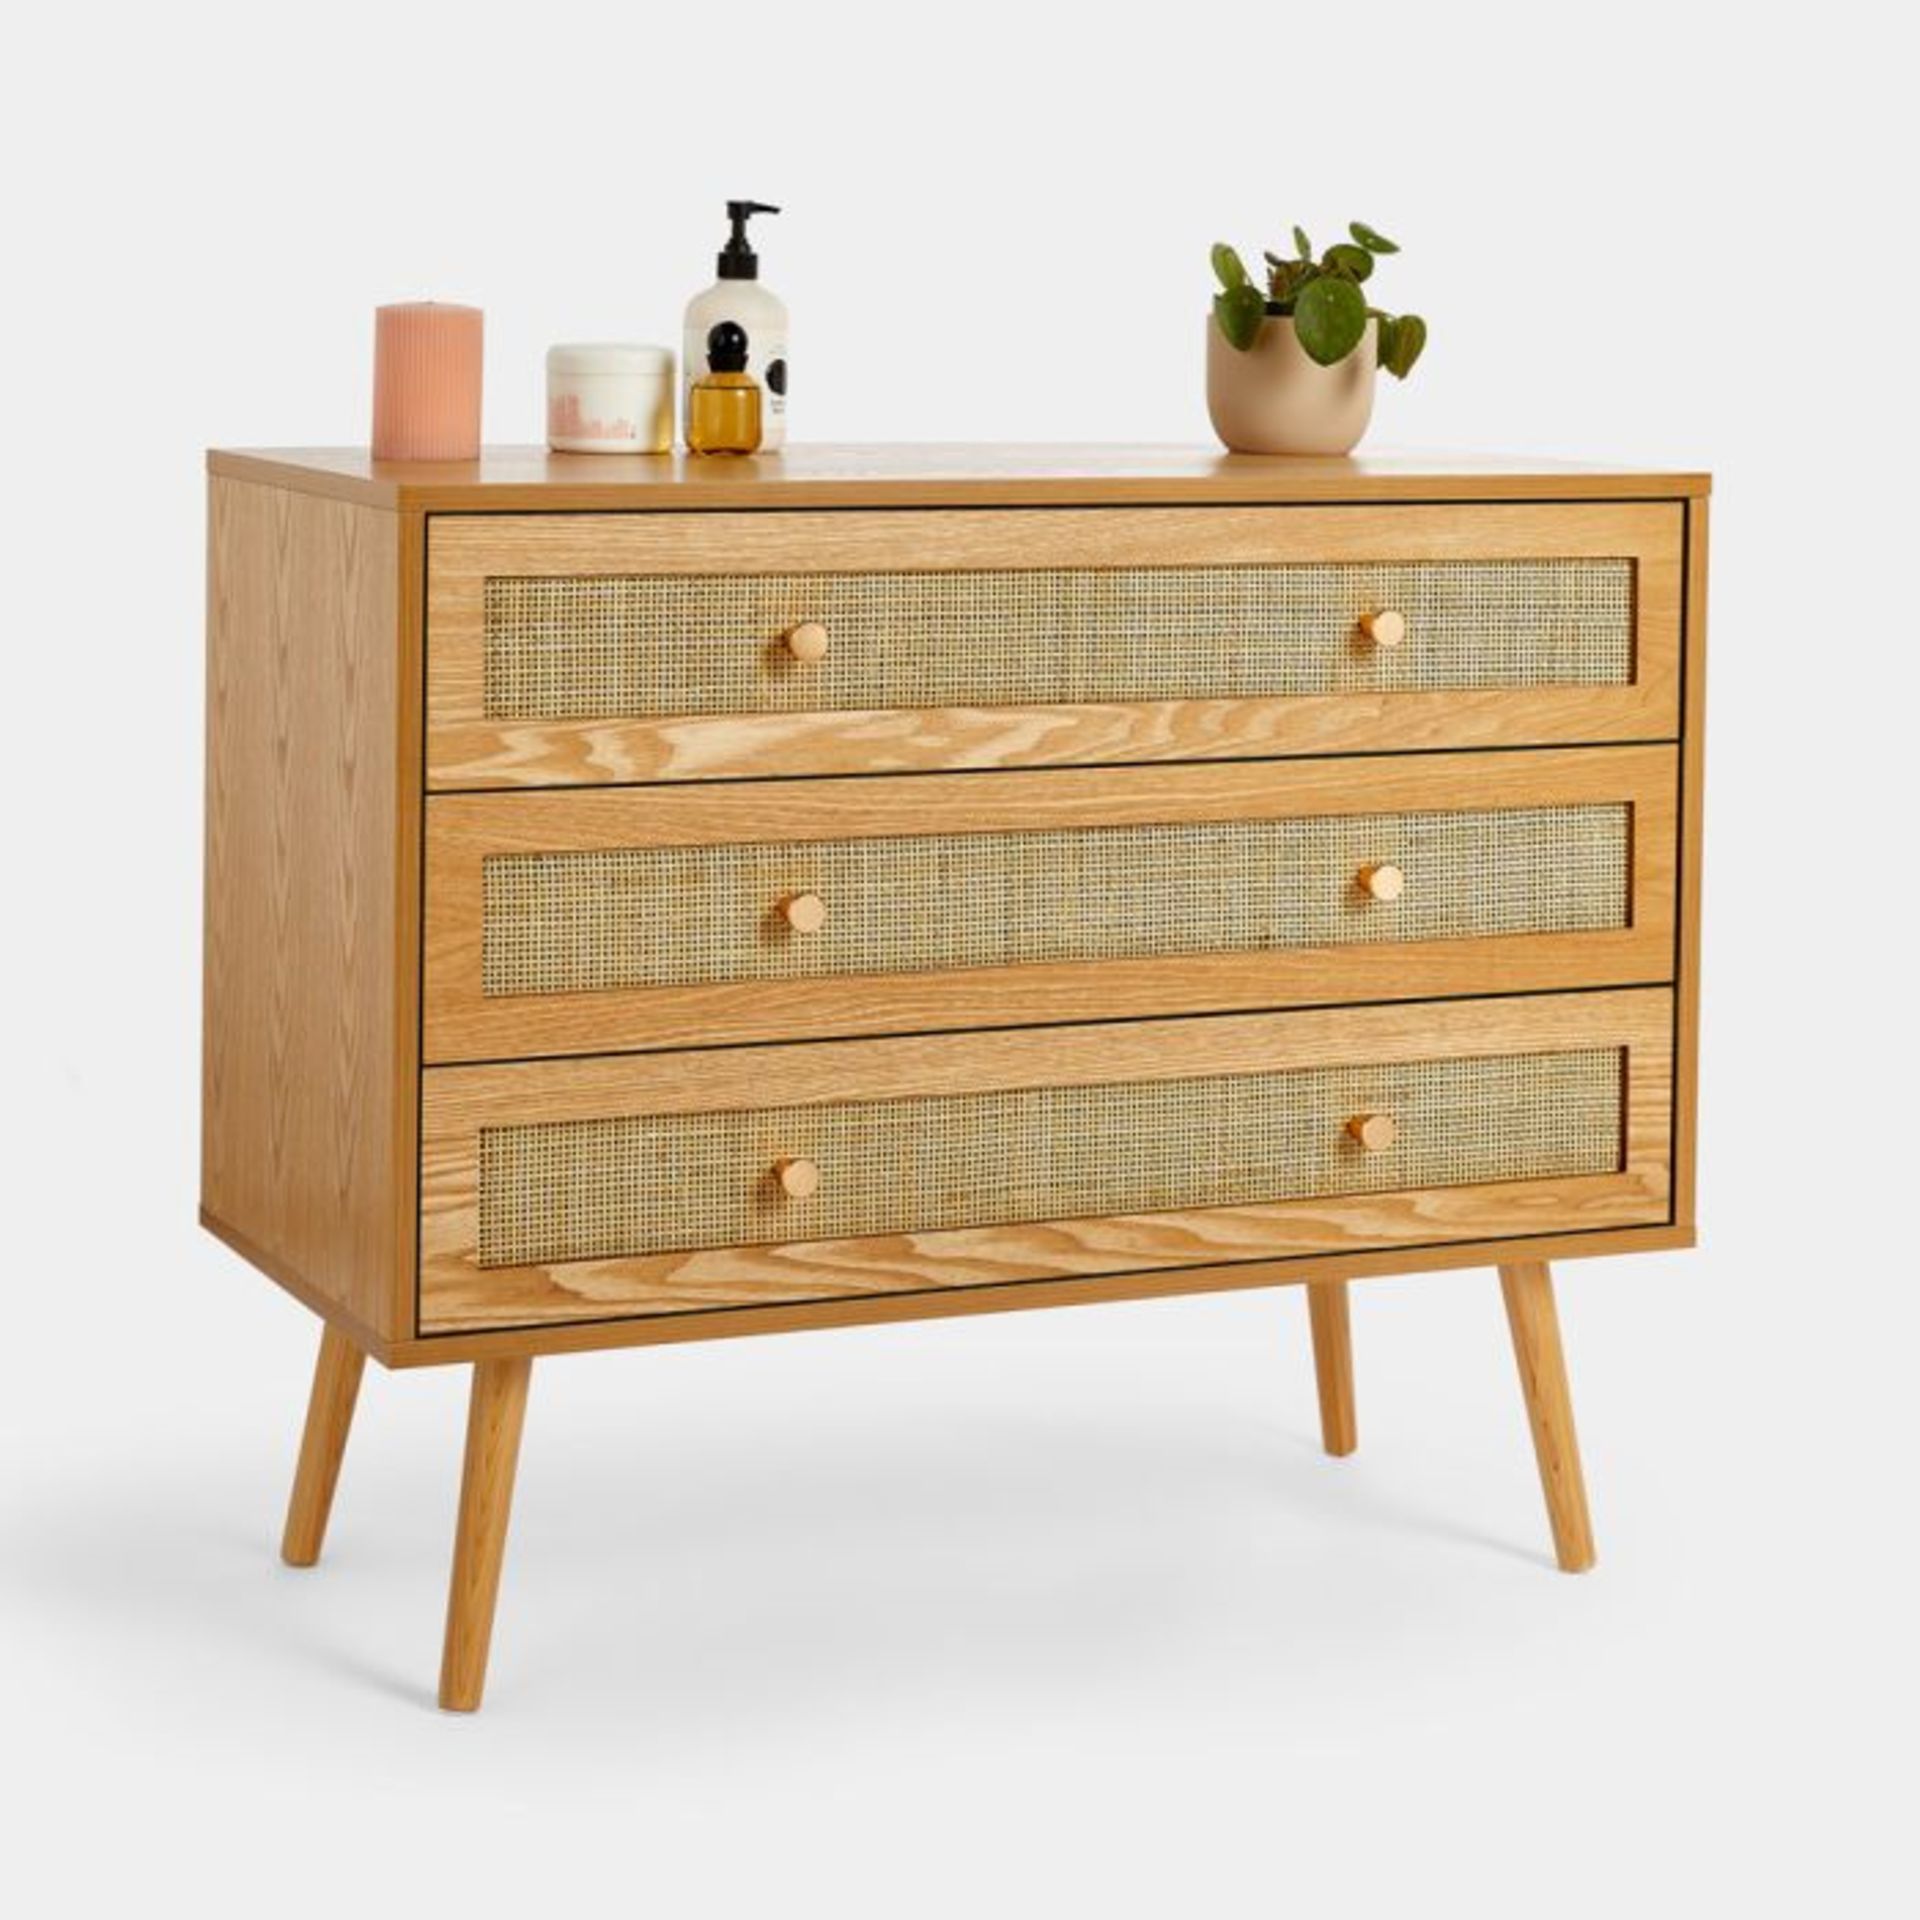 Rattan Chest of Drawers. - ER35. Bring an earthy, natural feel to your space with a combination of